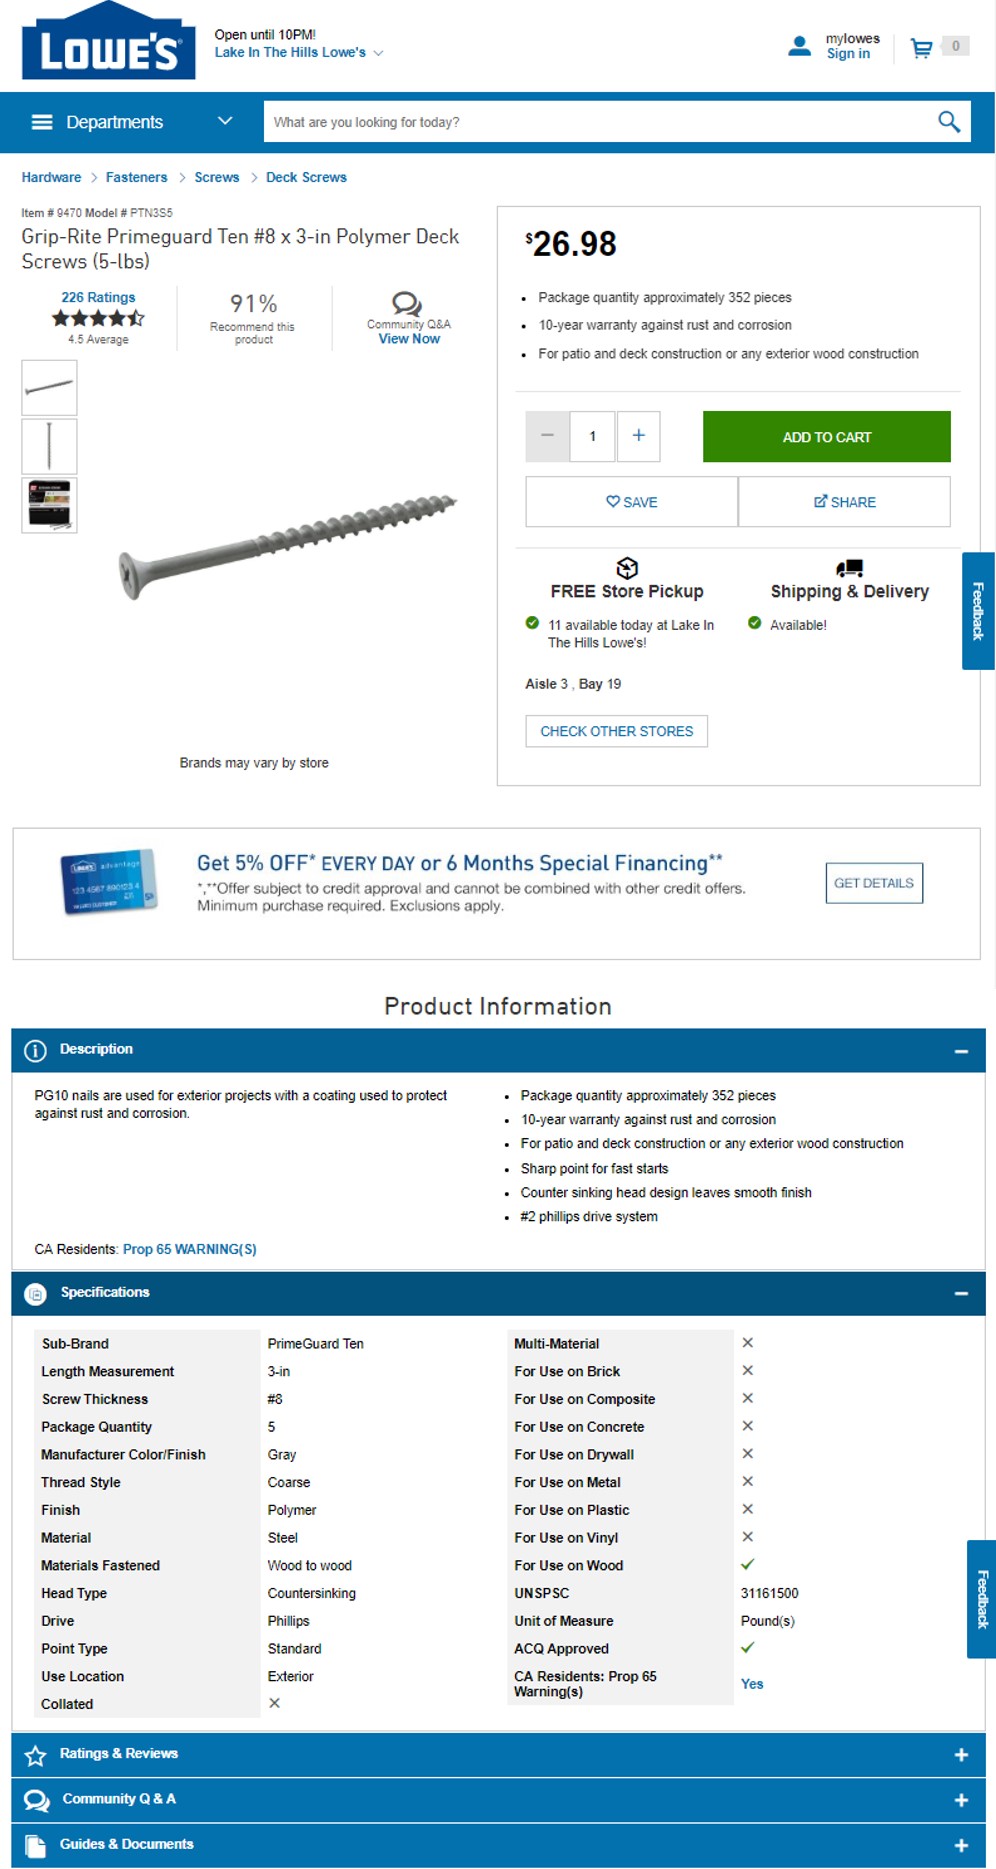 Lowe's product detail page.